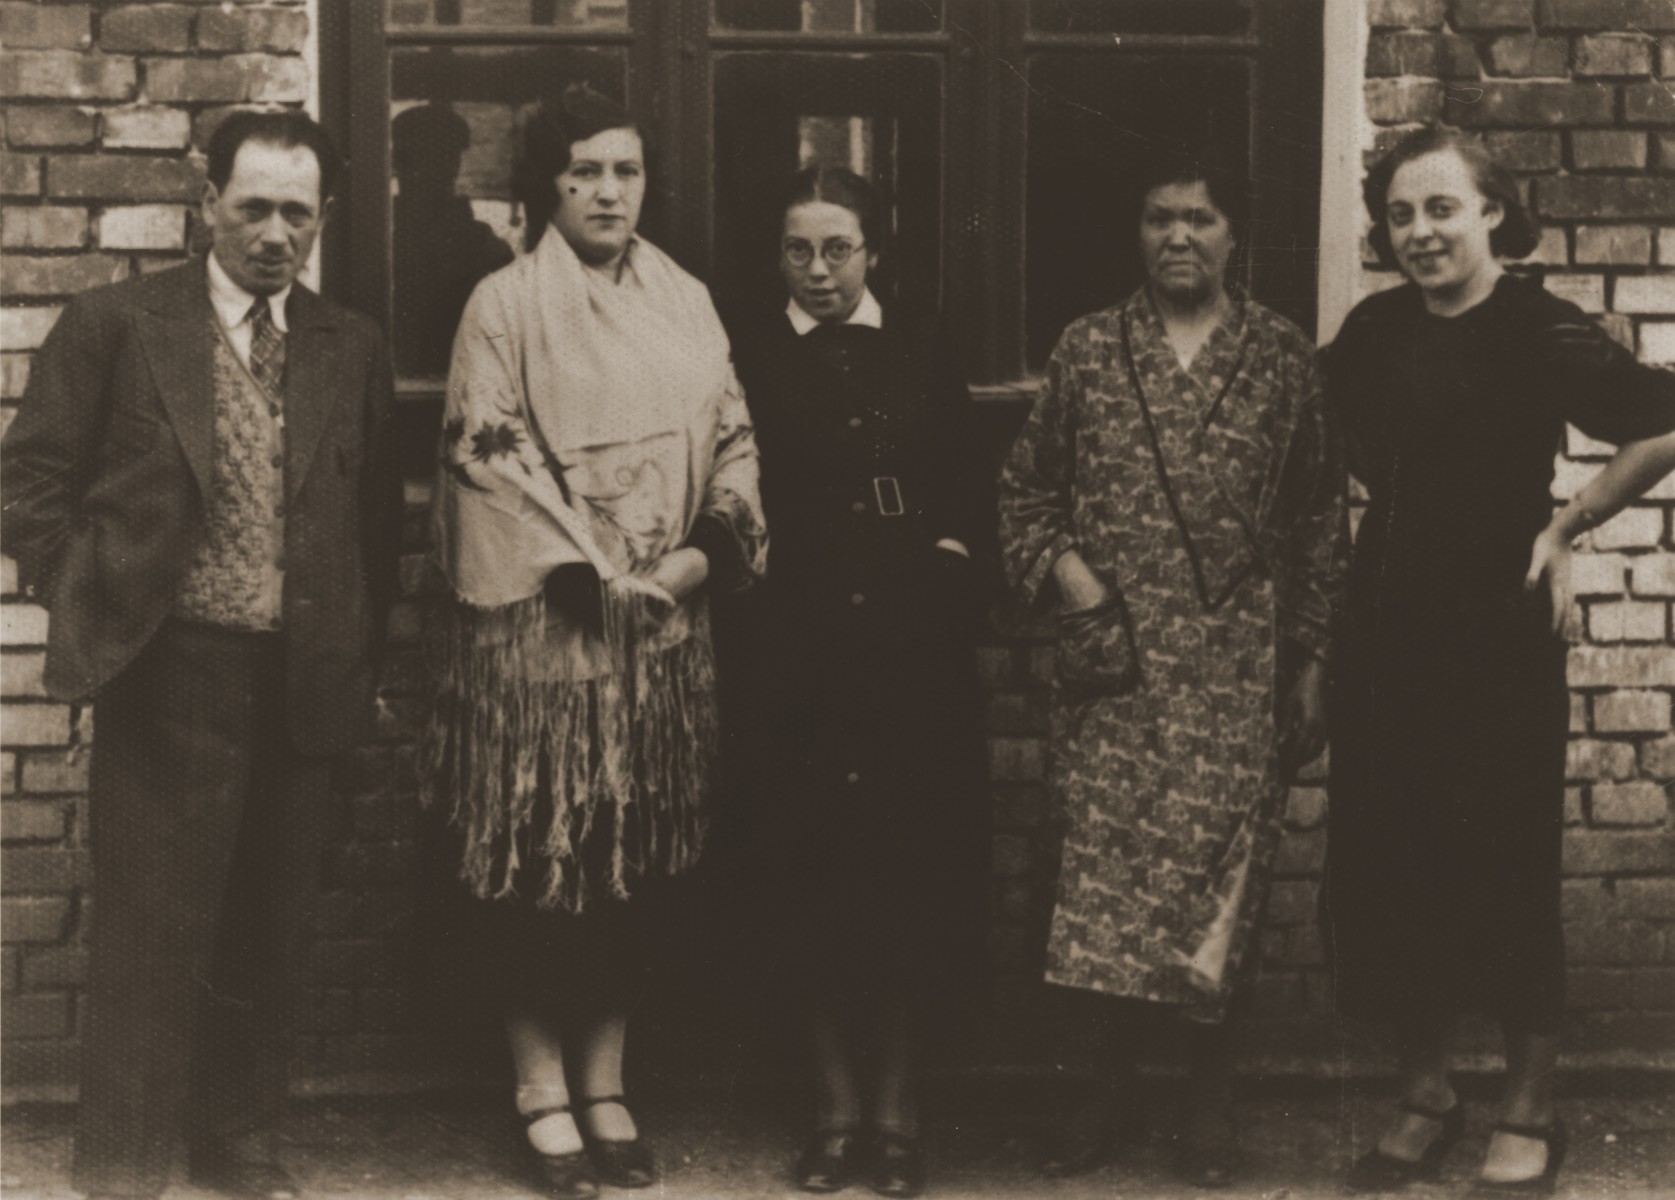 Members of the extended Berland family pose in back of their new home in Chelm.  Pictured from left to right are:  Abraham, Sara and Felicja Berland; Chaya Rachel Hilf (Sara's mother); and Hela Zonenszajn (Sara's cousin).